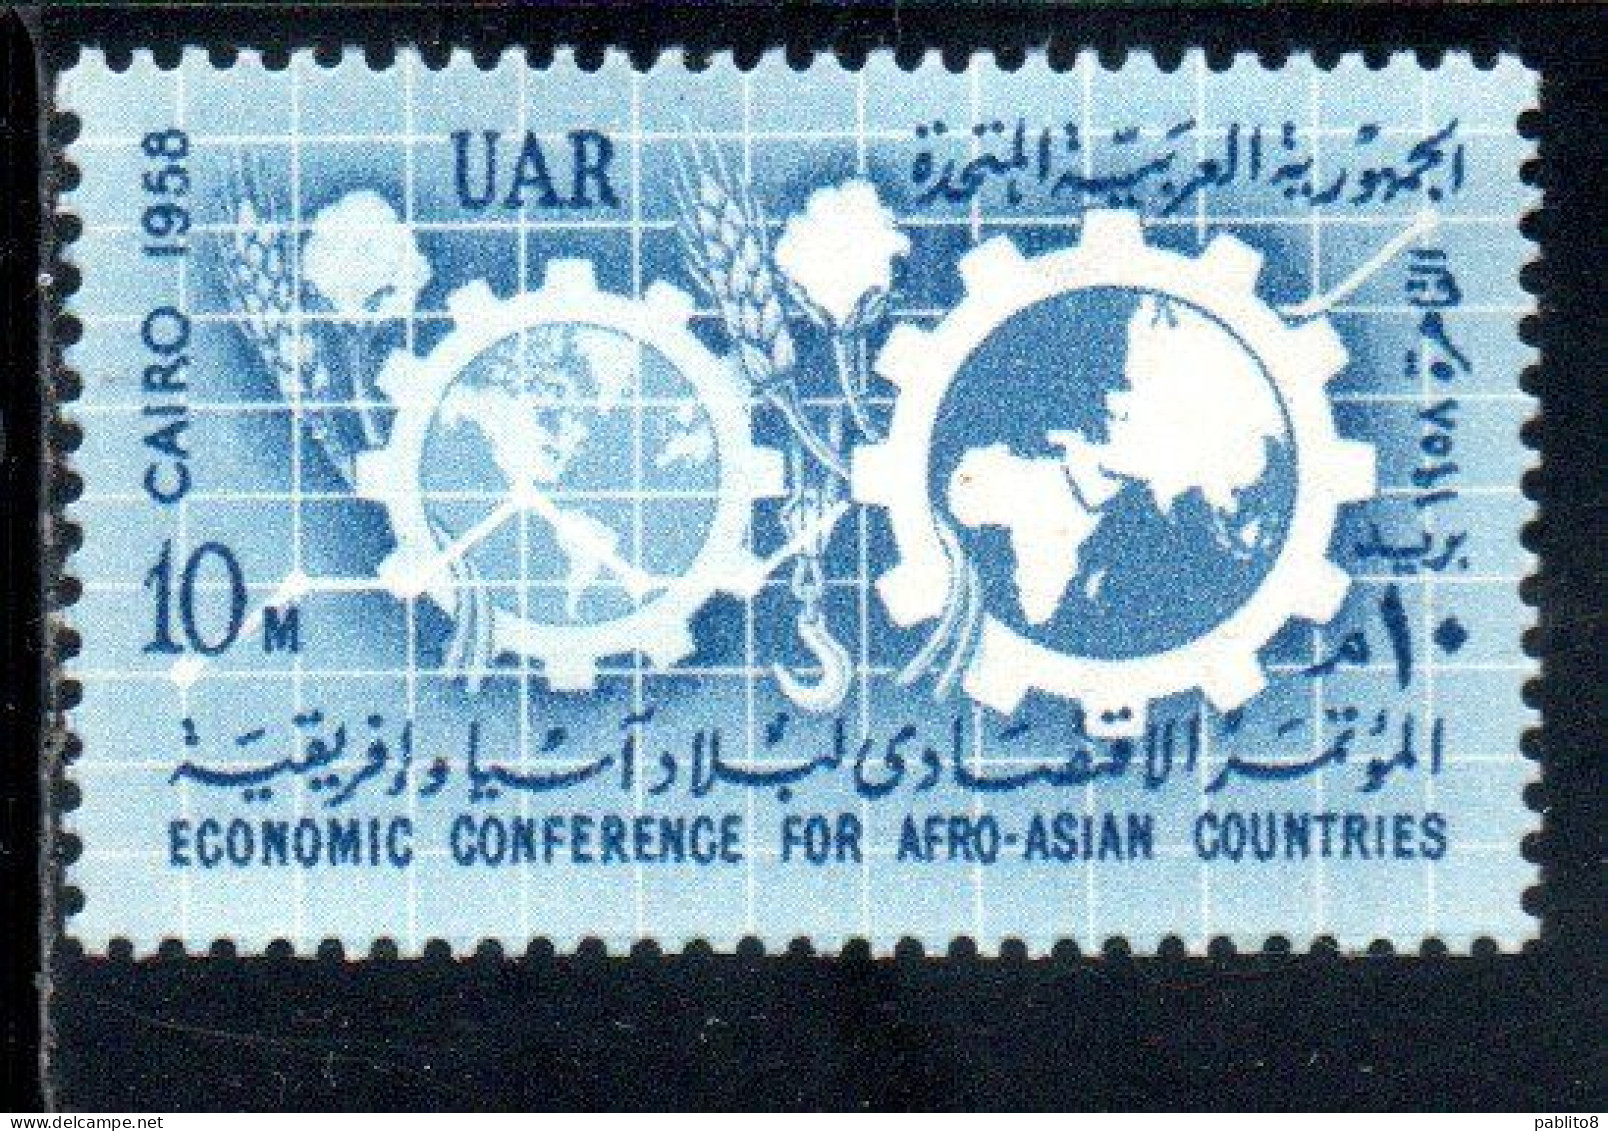 UAR EGYPT EGITTO 1958 ECONOMIC CONFERENCE OF AFRO-ASIAN COUNTRIES CAIRO MAPS AND COGWHEELS 10m MNH - Nuovi